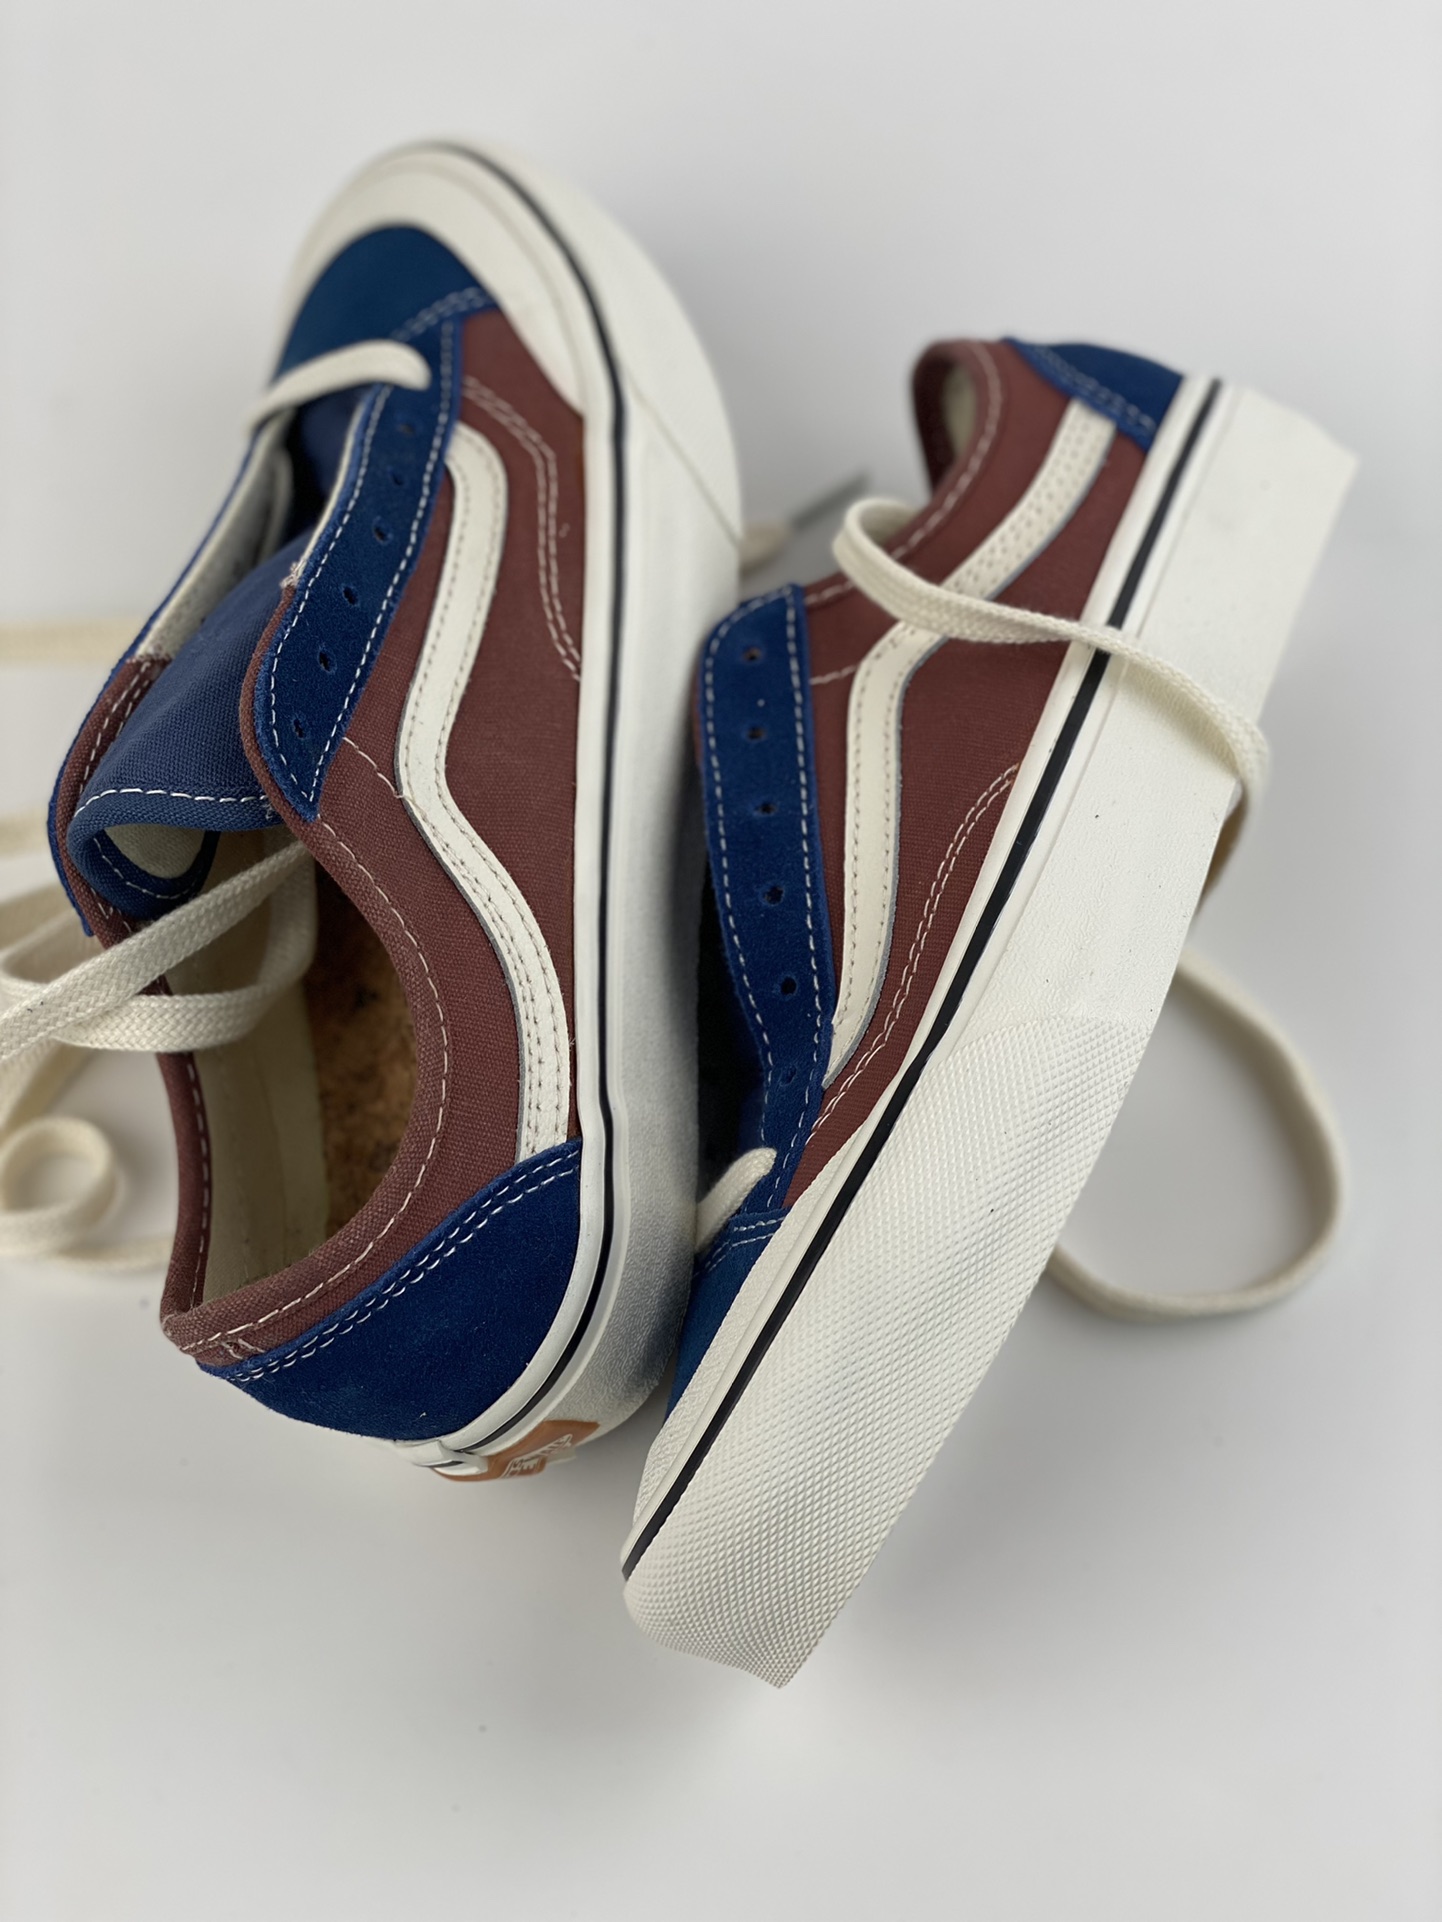 Vans Fans official style 136 VR3 red and blue stitching contrasting American retro plate shoes